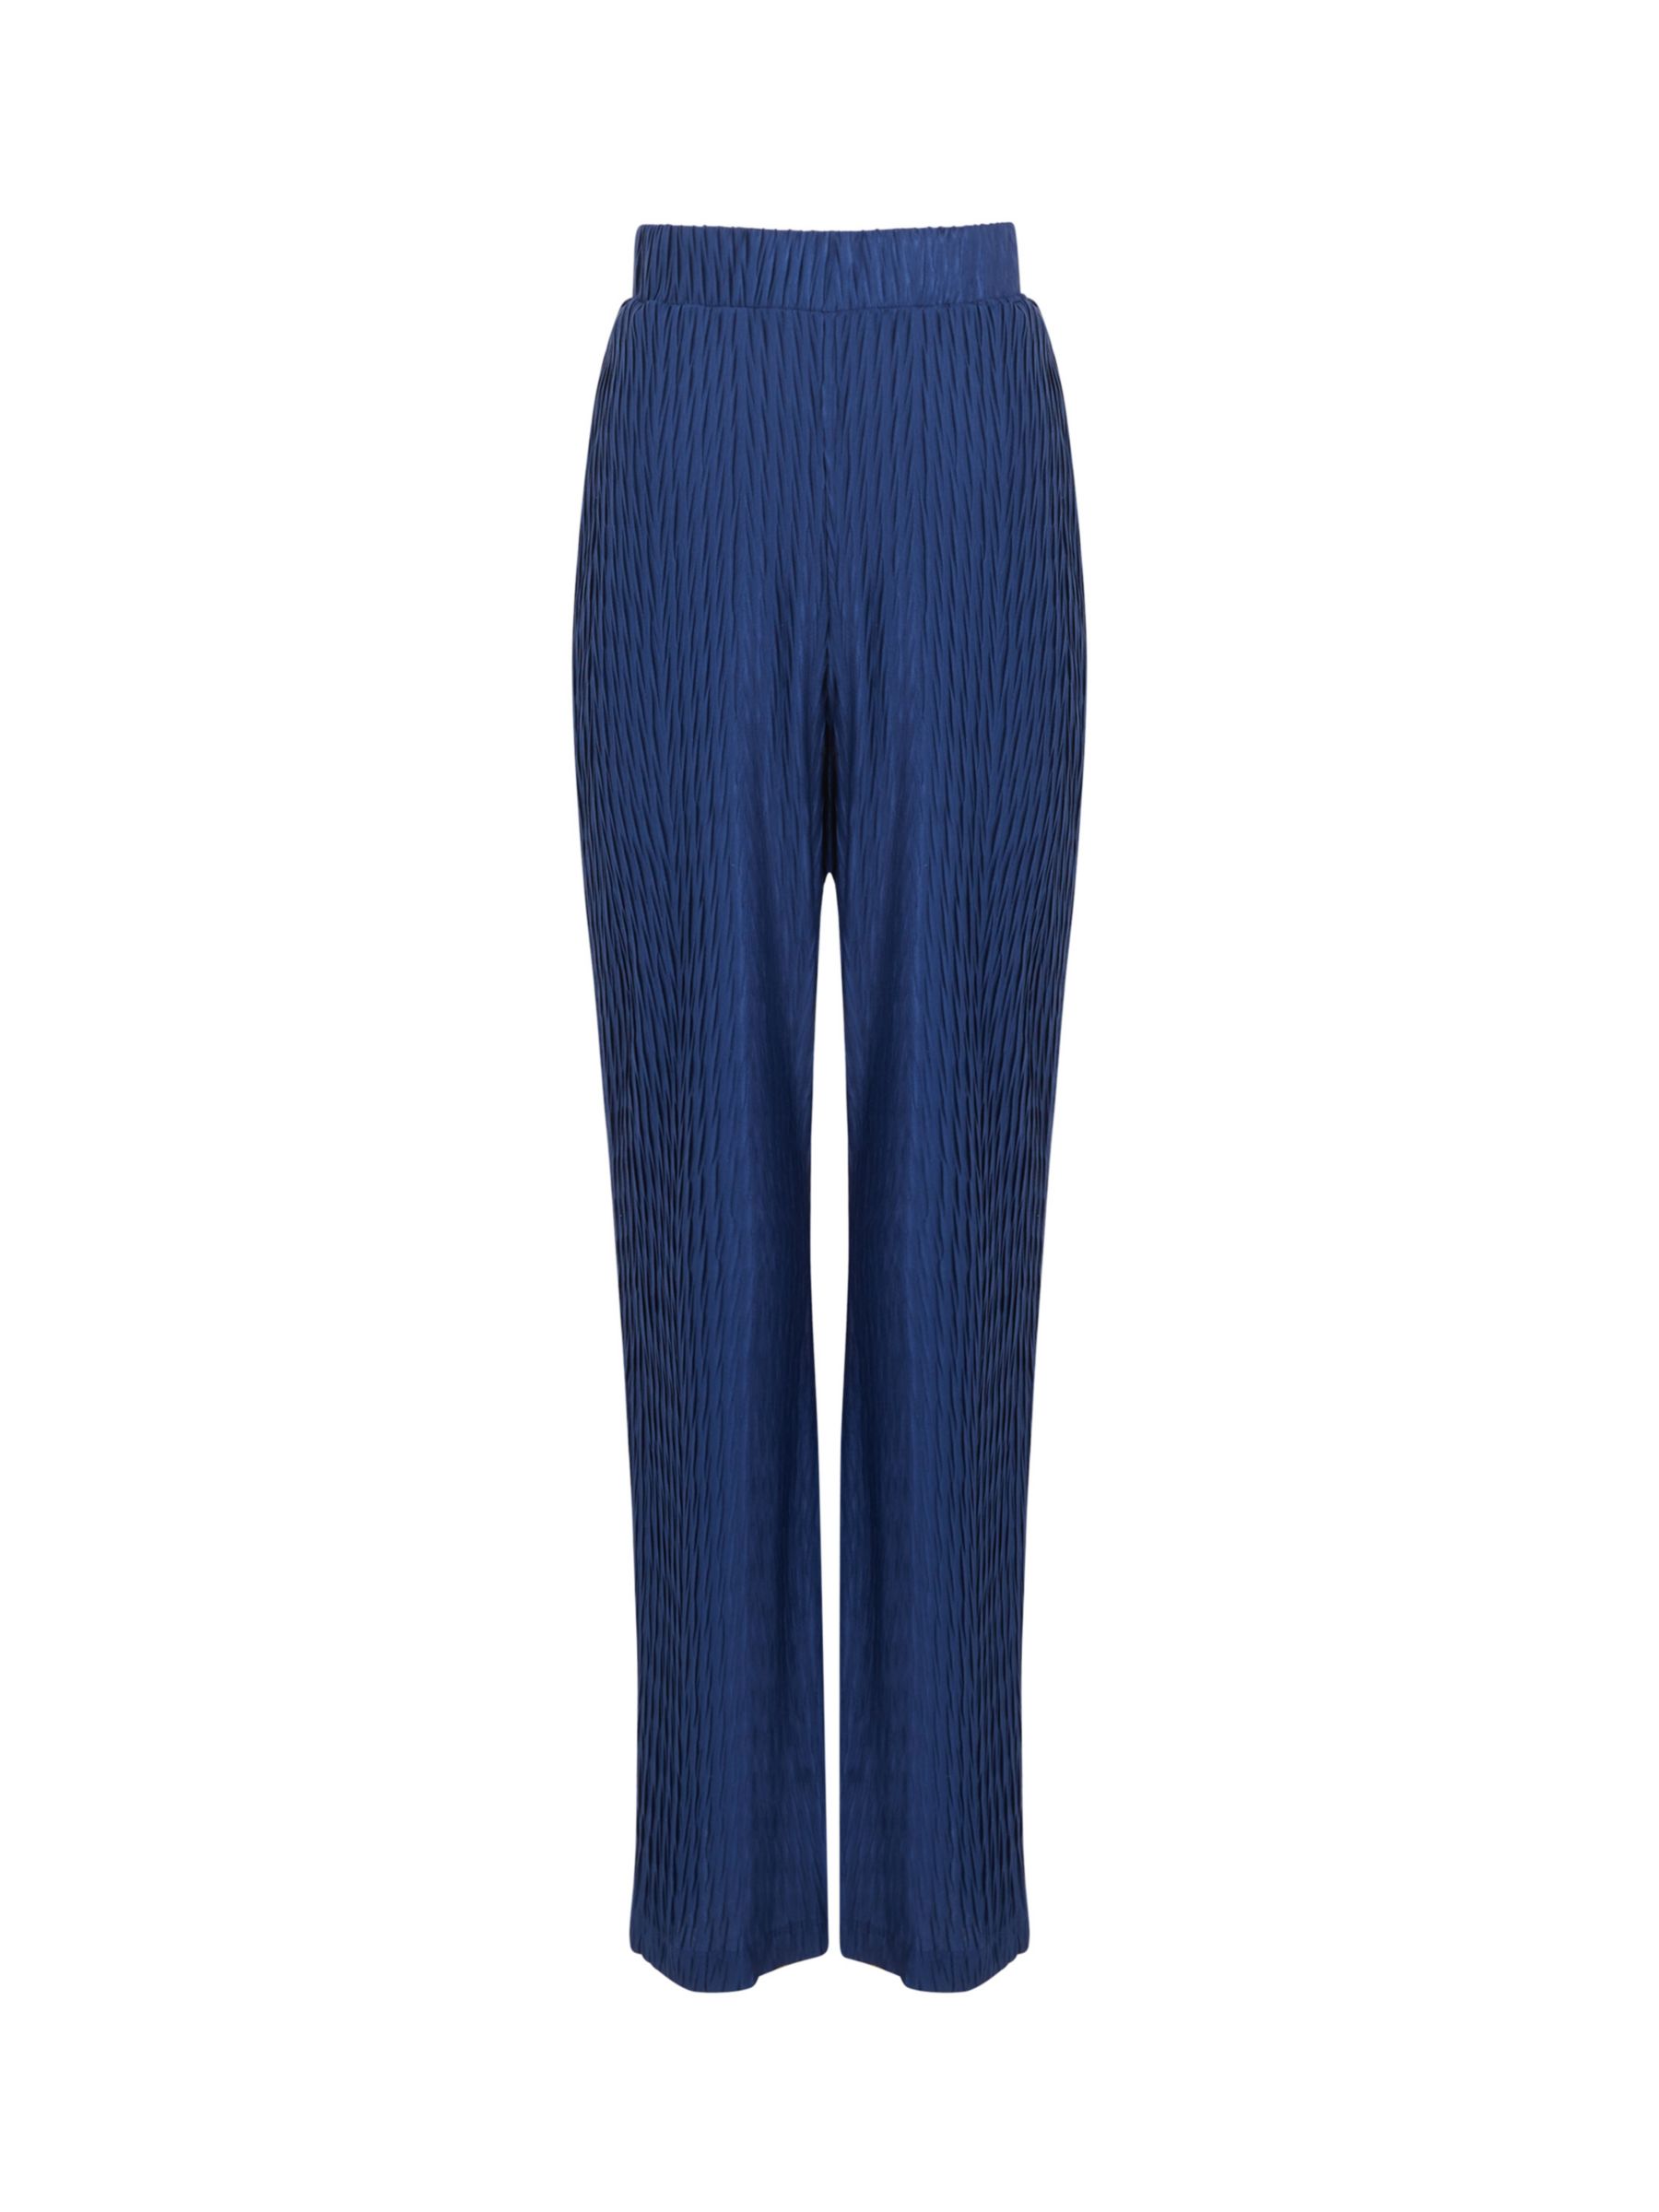 French Connection Scarlette Flared Textured Trousers, Midnight Blue, S